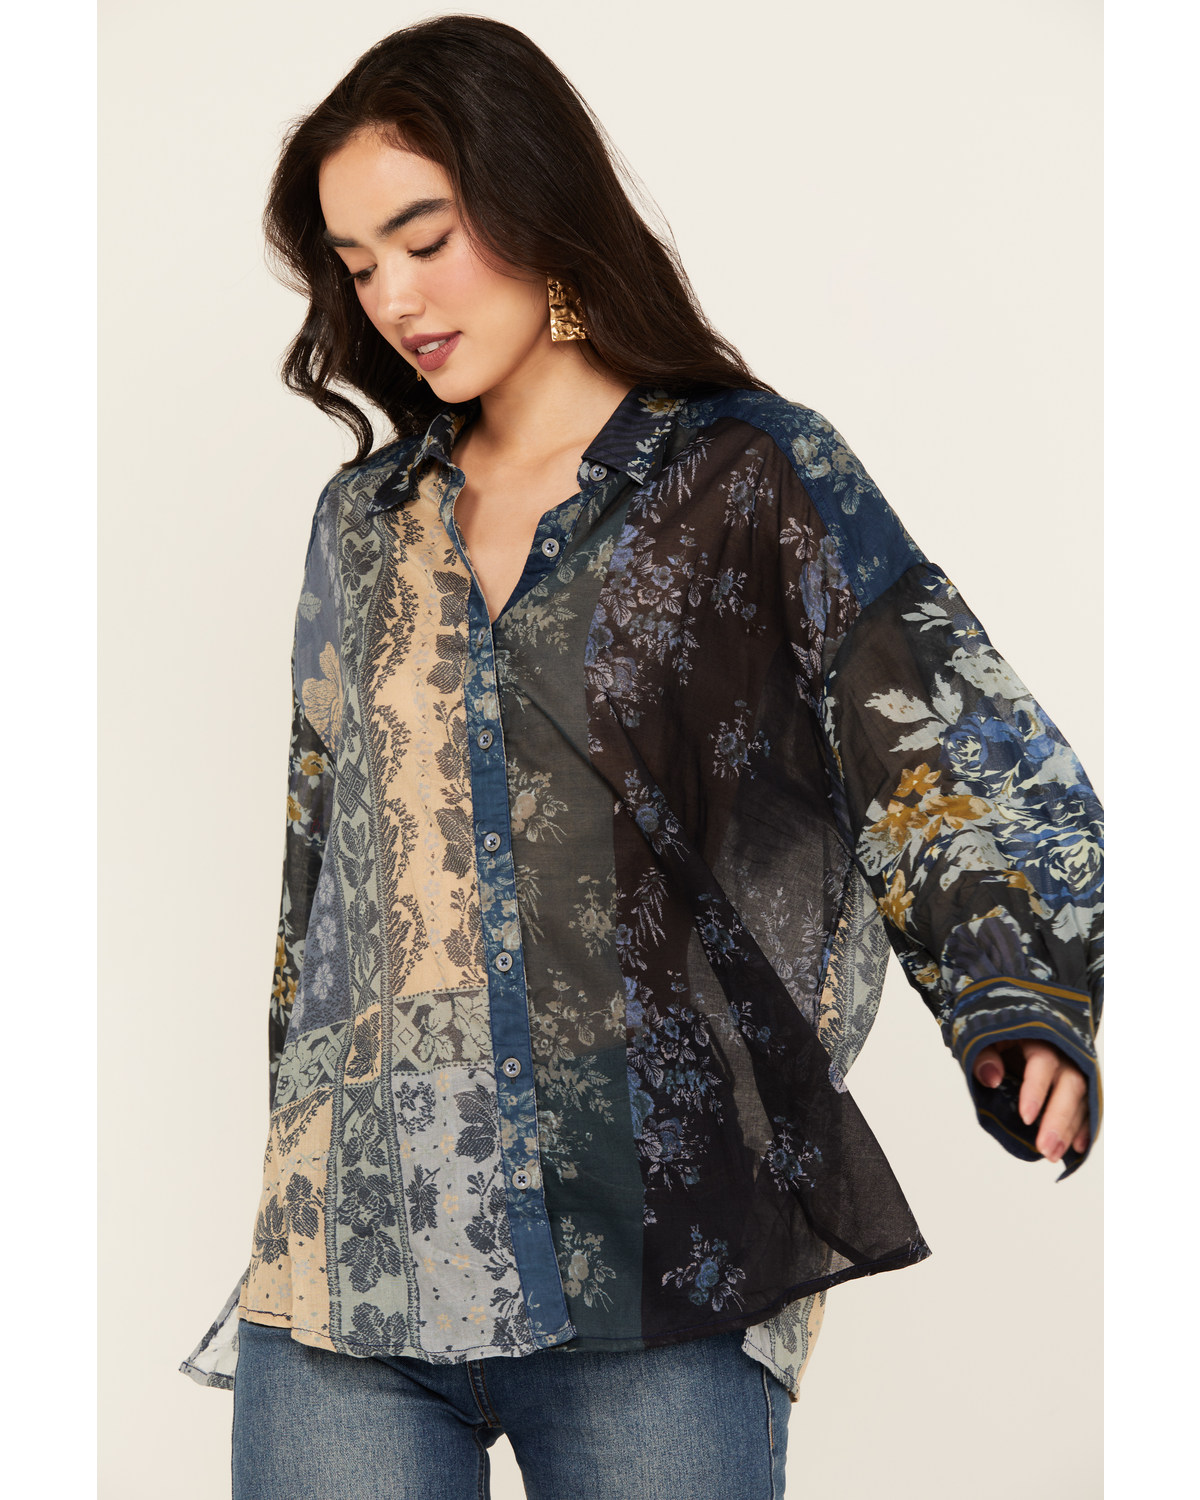 Free People Women's Flower Patch Long Sleeve Button-Down Blouse